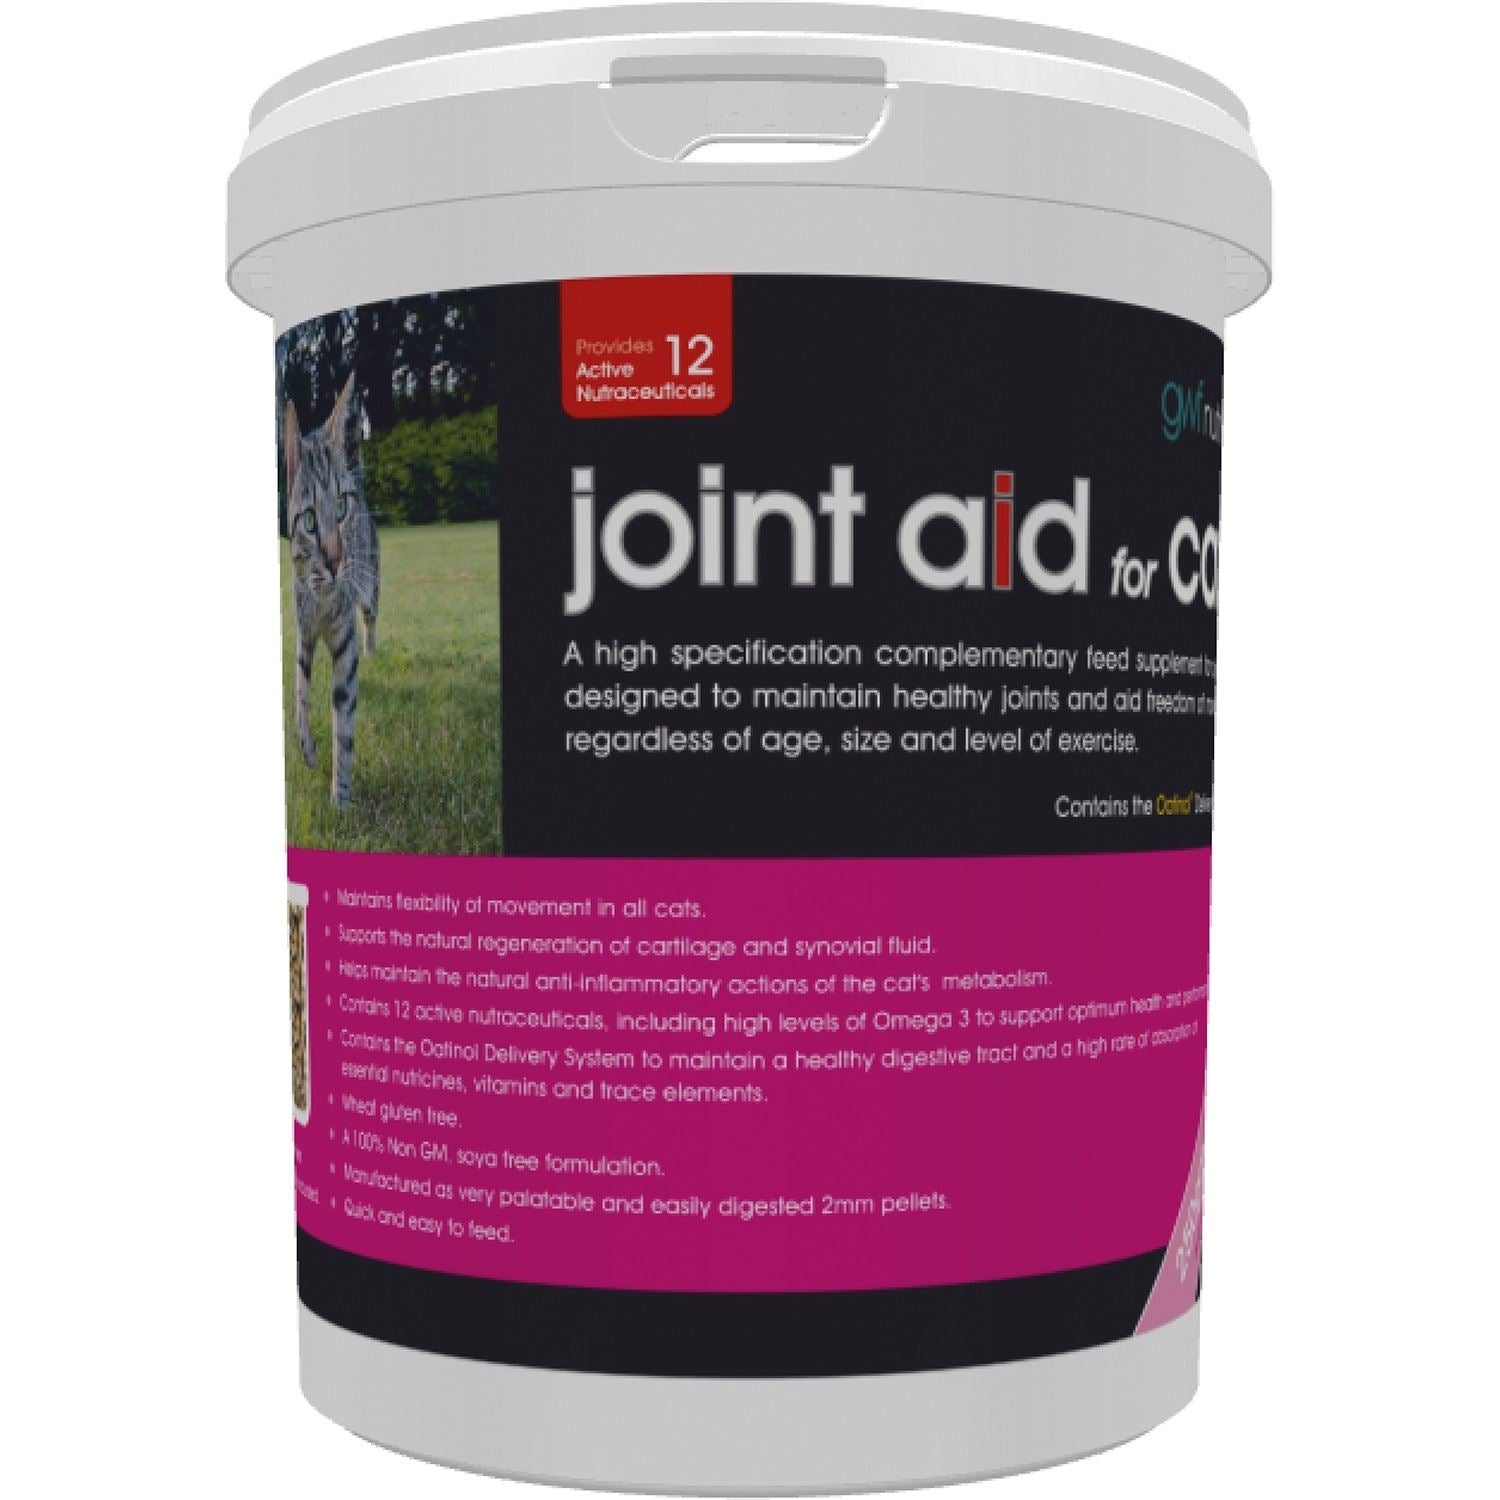 GWF Nutrition Joint Aid For Cats - Just Horse Riders